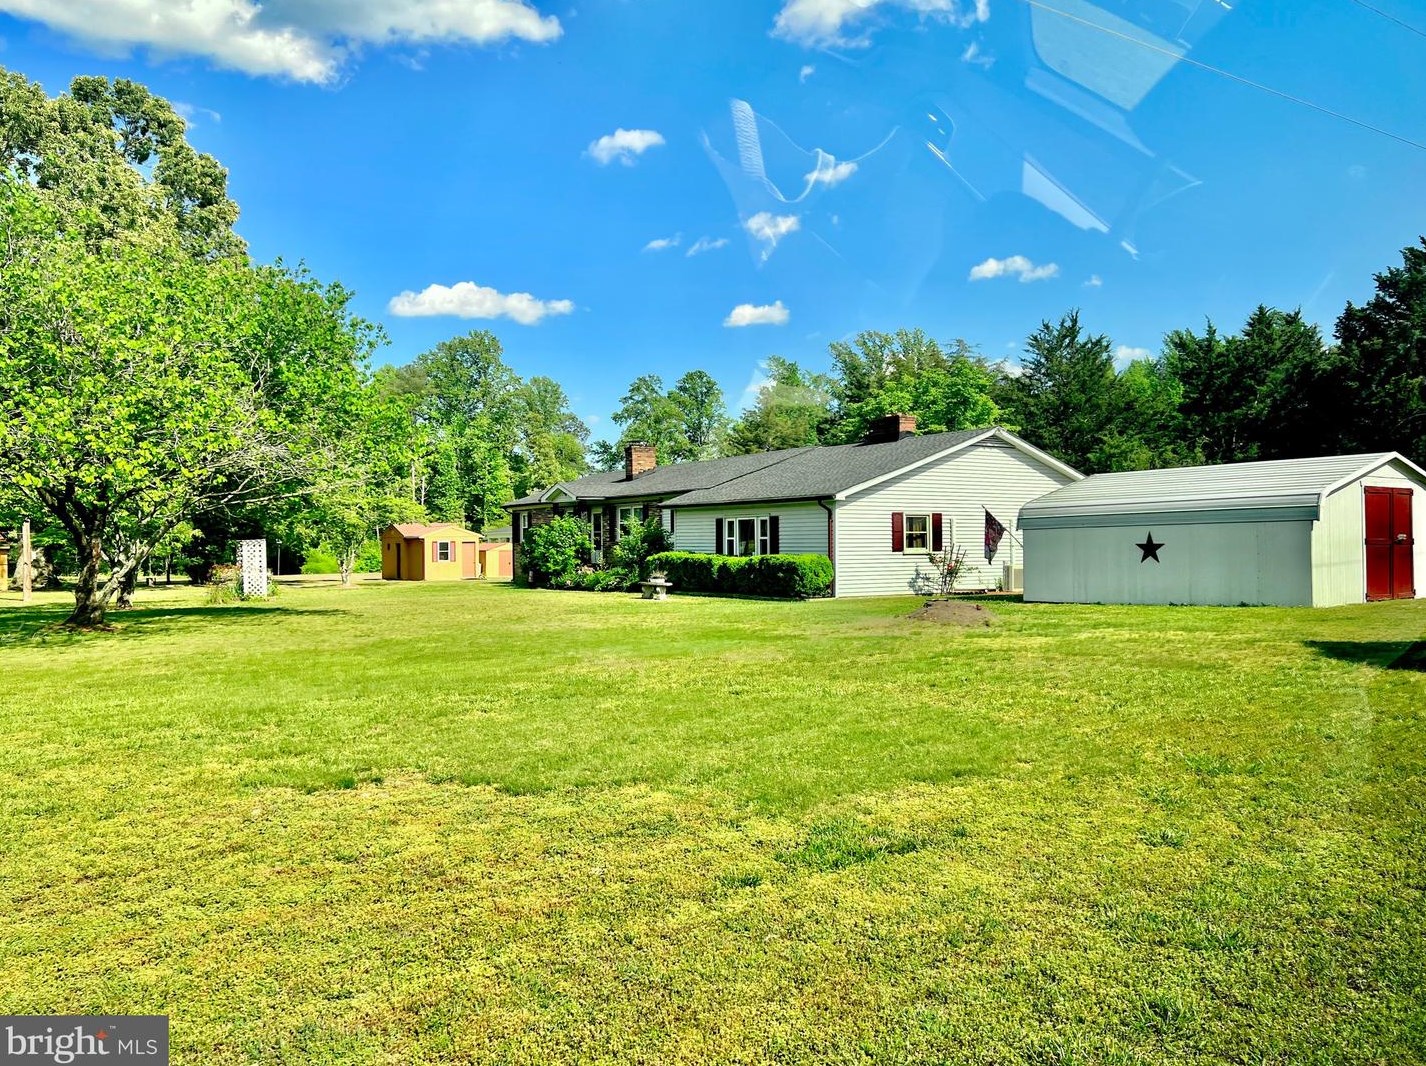 26309 Old Pitts Rd, Ruther Glen, VA 22546